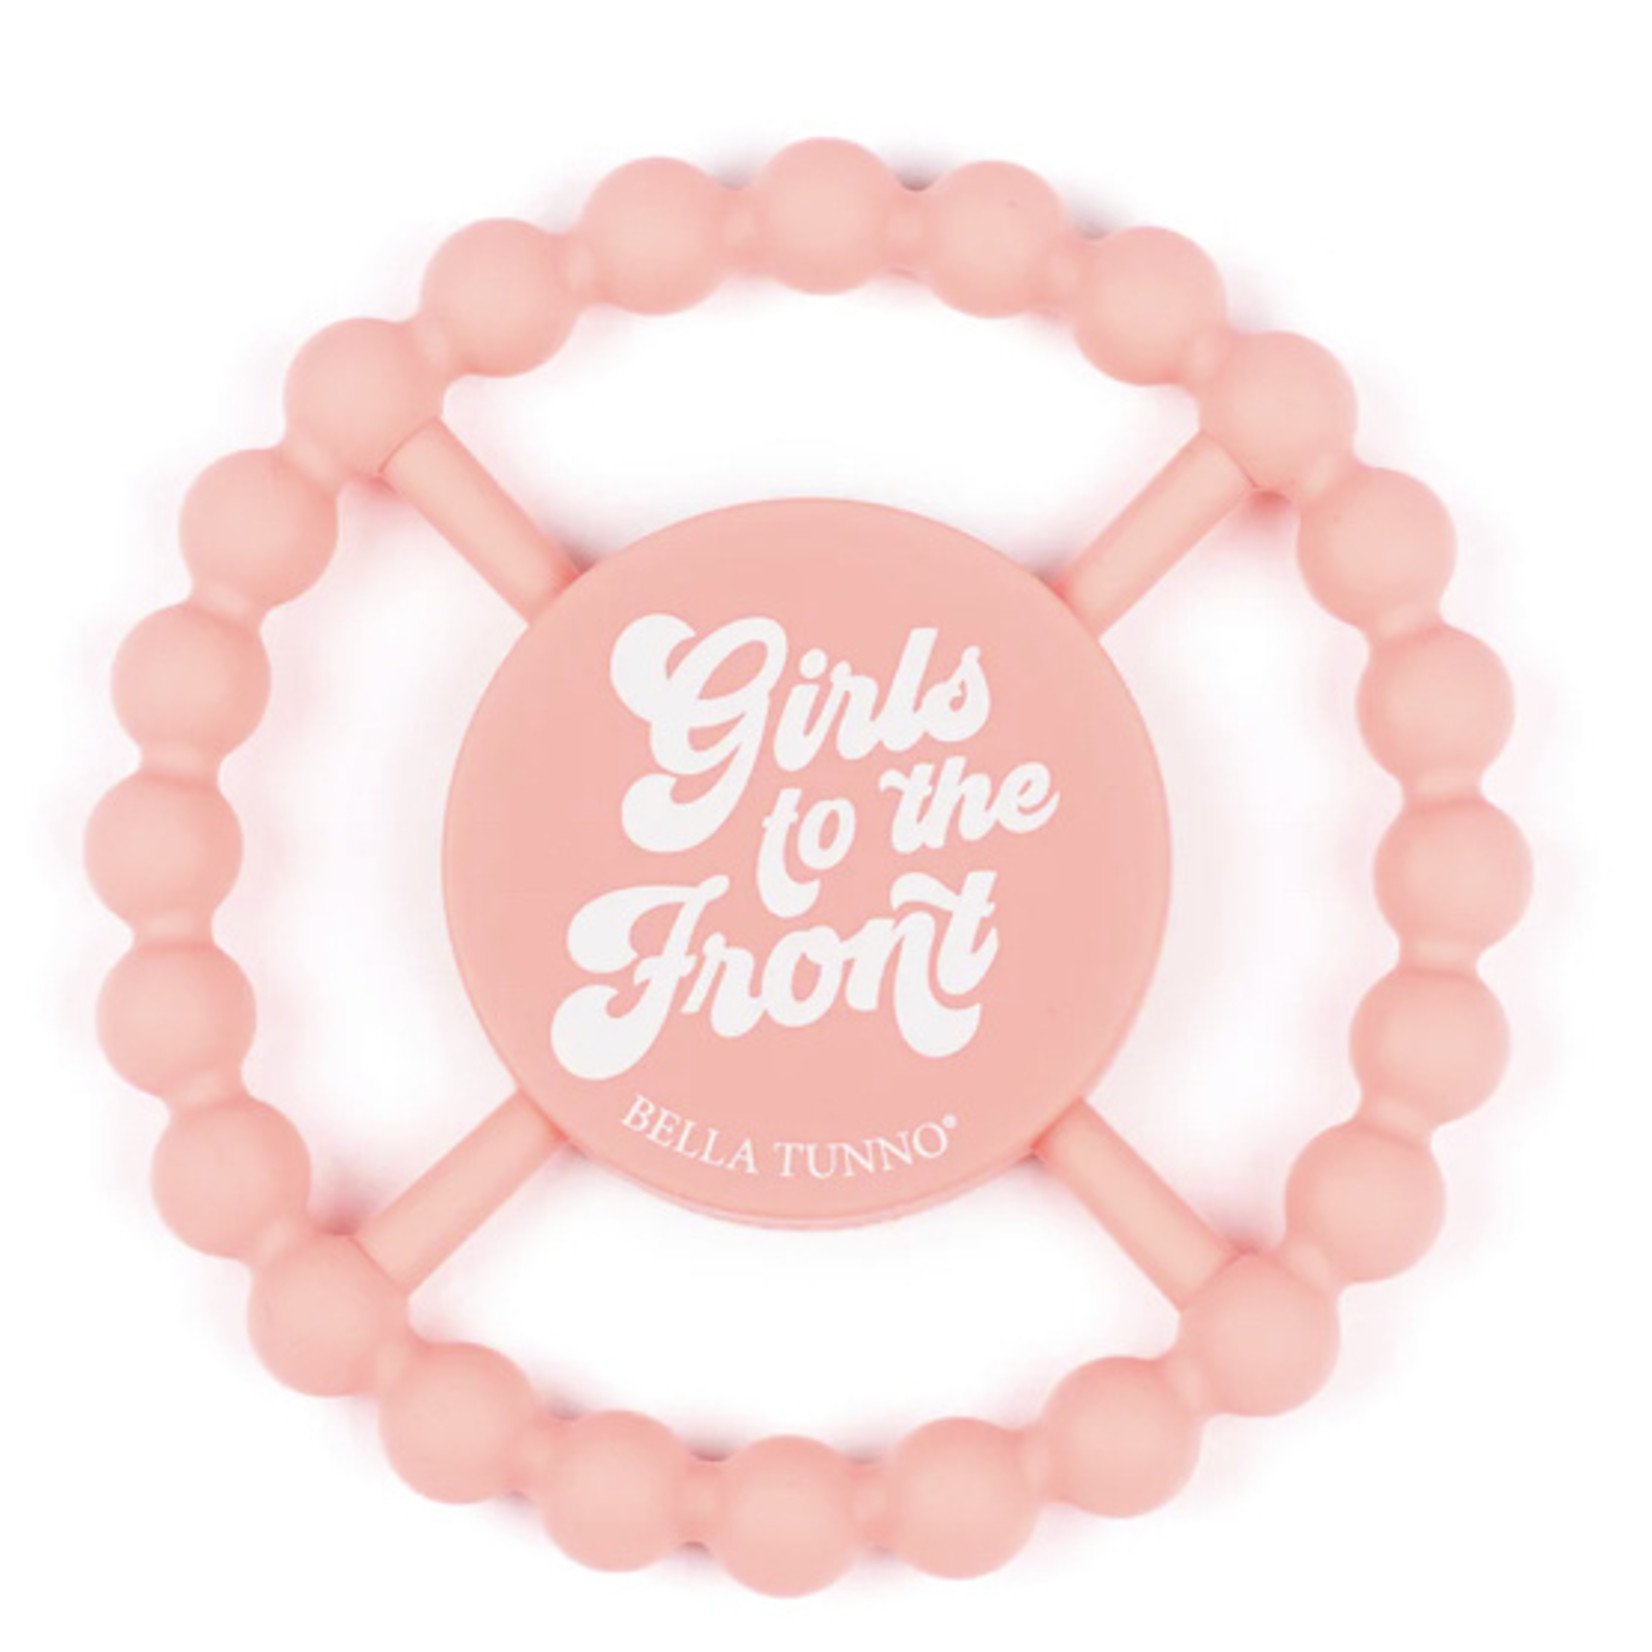 Bella Tunno Girls To The Front Teether